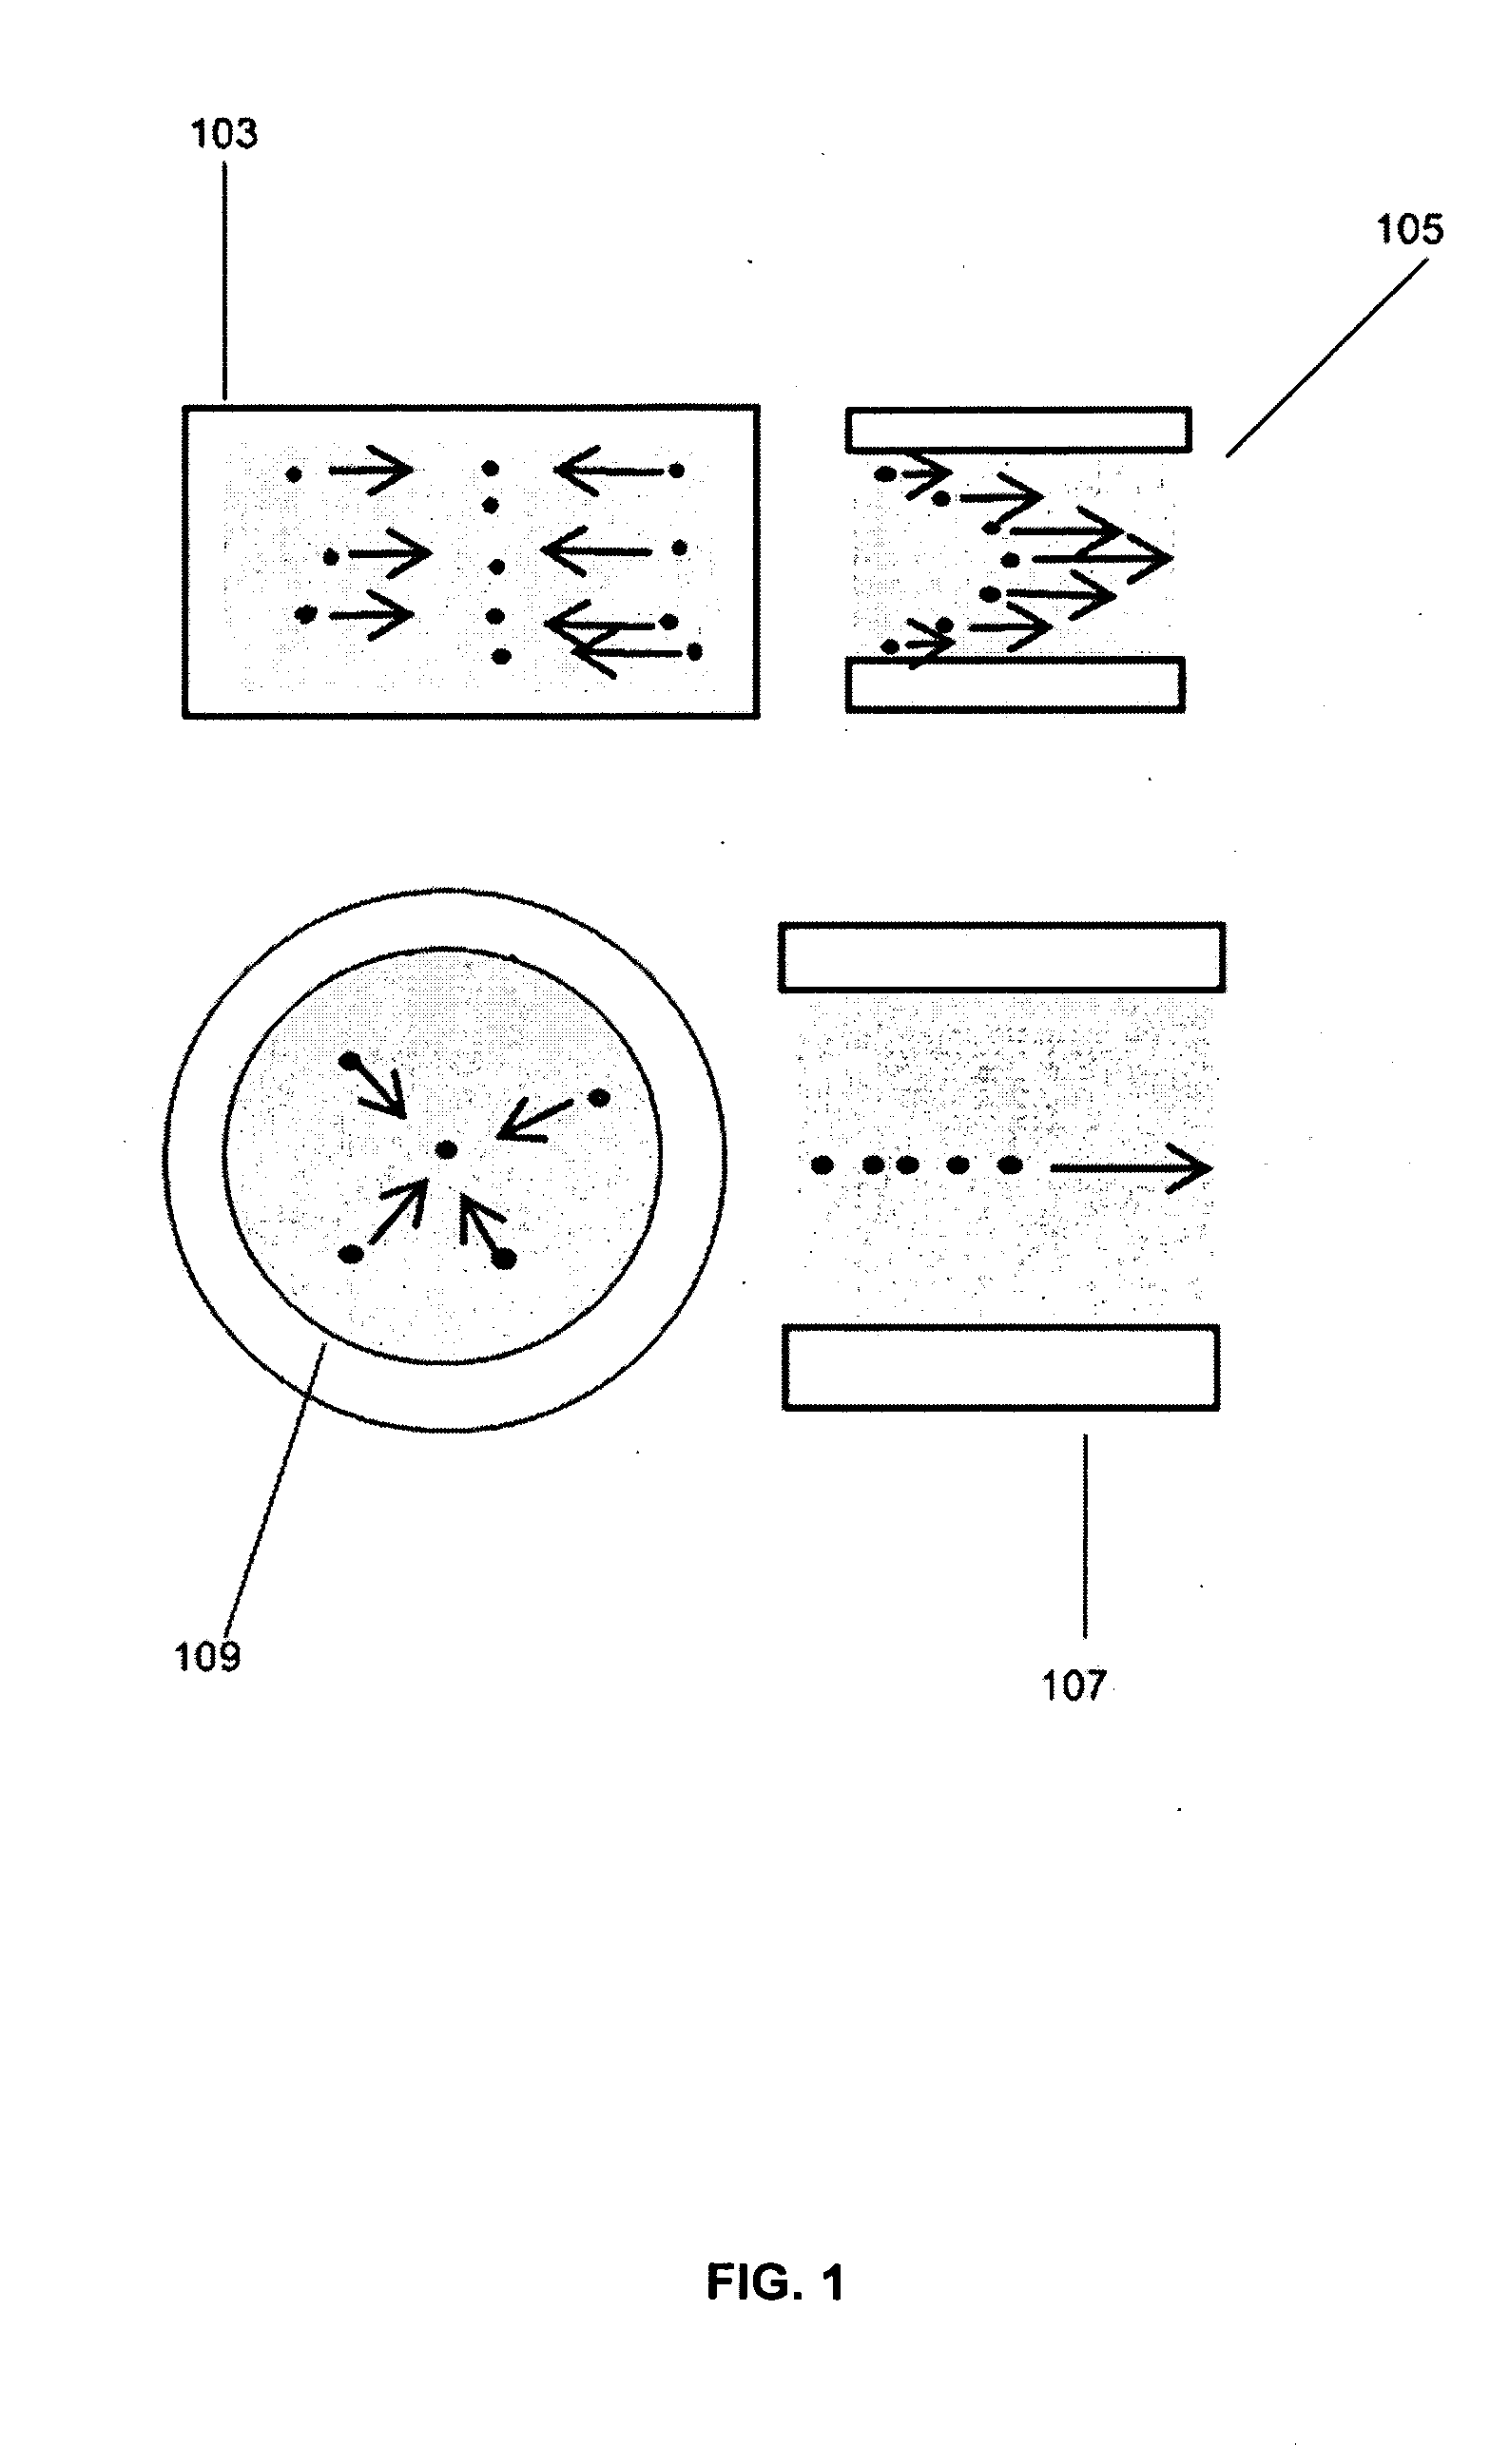 Particle Quantifying Systems and Methods Using Acoustic Radiation Pressure